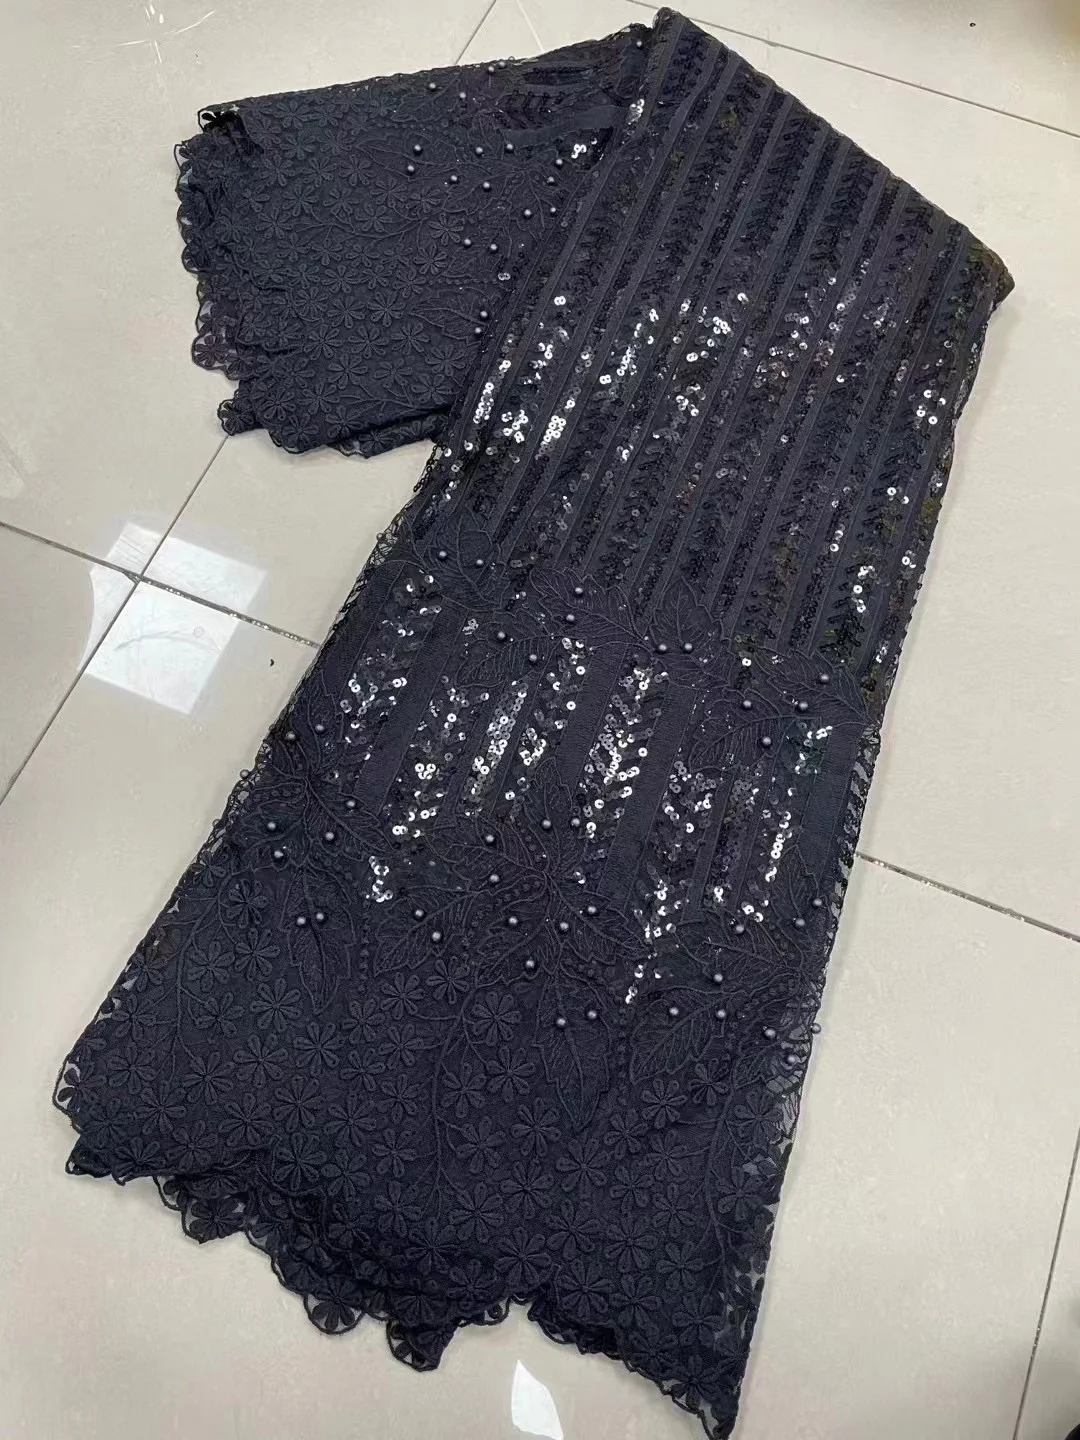 Newest African Guipure Lace Fabric 2022 High Quality French Nigerian 3d sequins Net Lace Fabric Apply to Party Dress